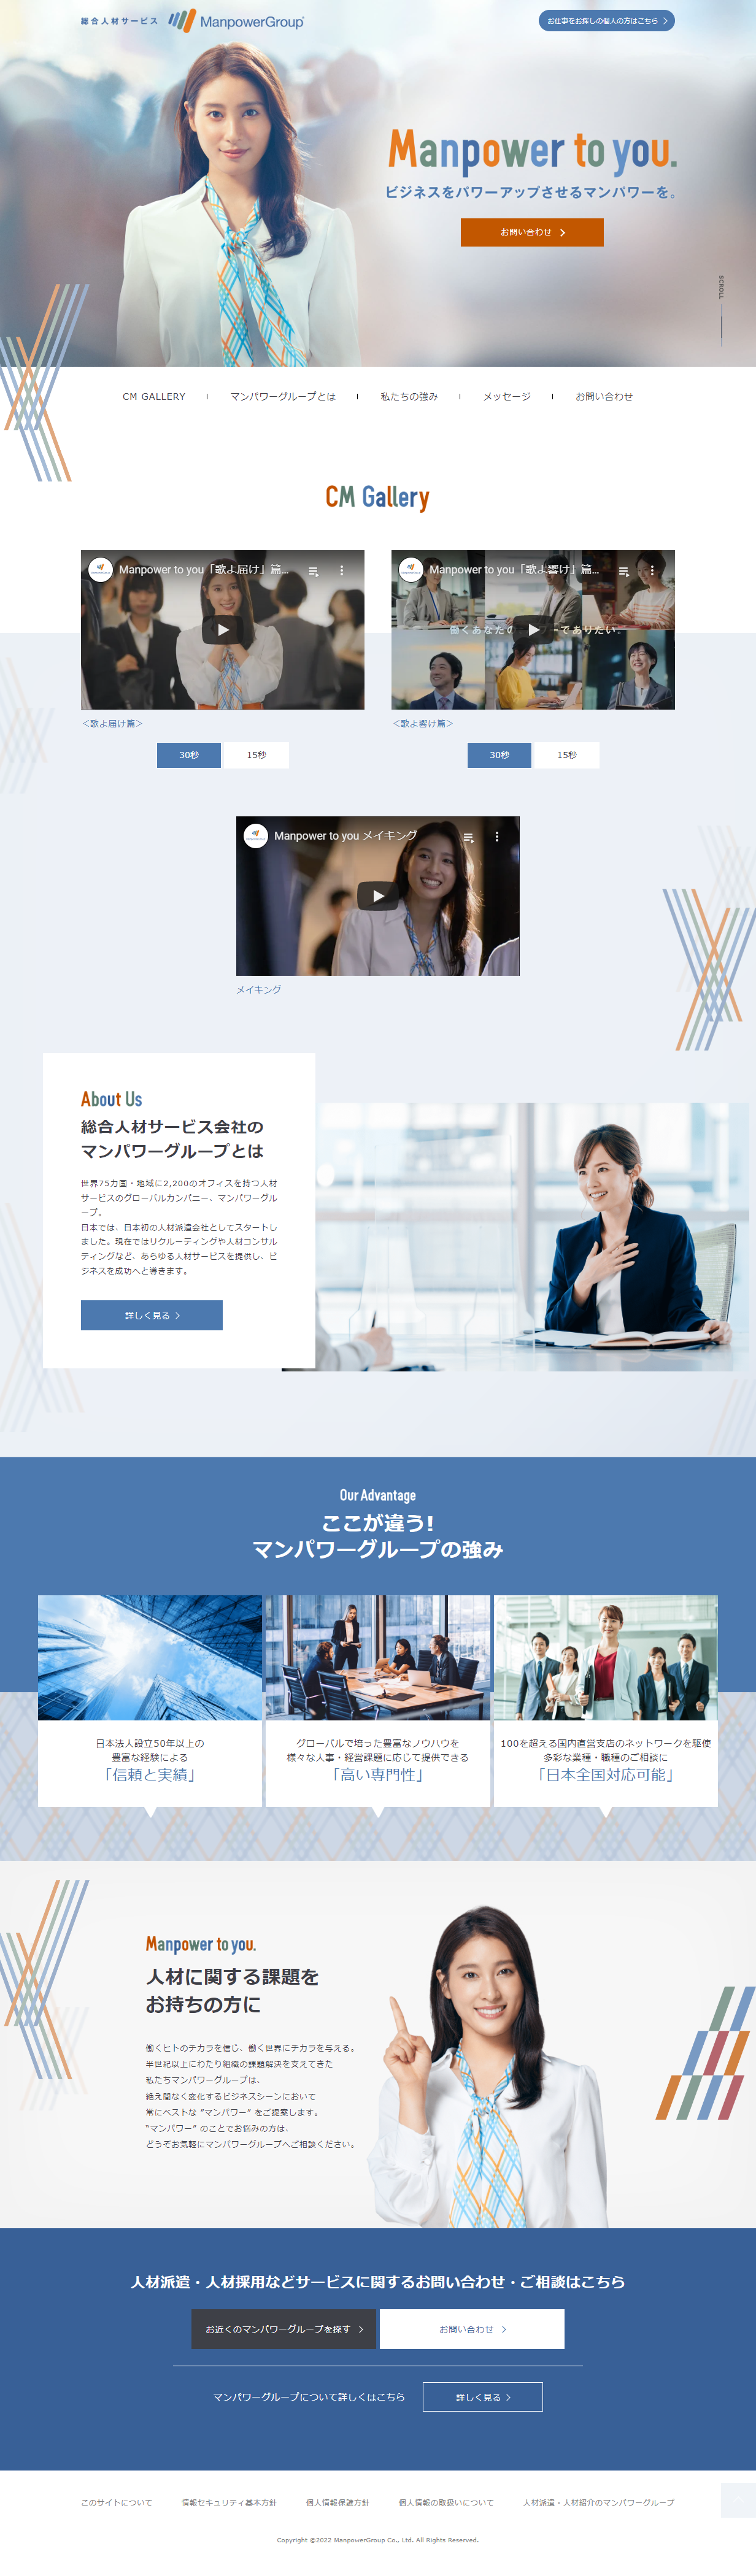 Manpower to you. 企業の方向け_pc_1